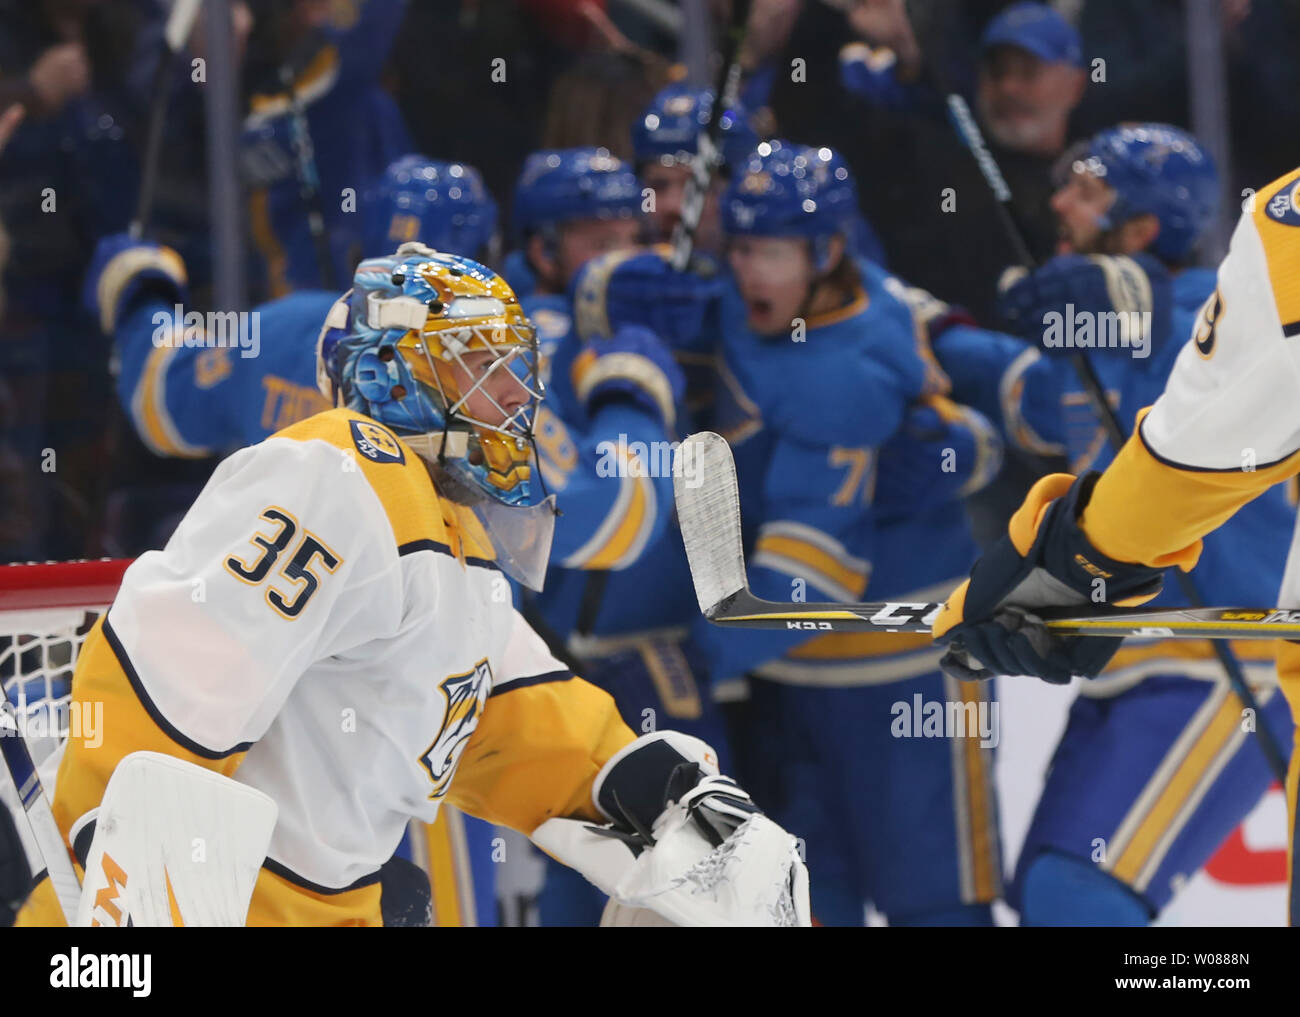 Nashville Predators goaltender Juuse Saros of Finland skates to his bench  in the first period against the St. Louis Blues at the Enterprise Center in  St. Louis on February 26, 2019. Photo